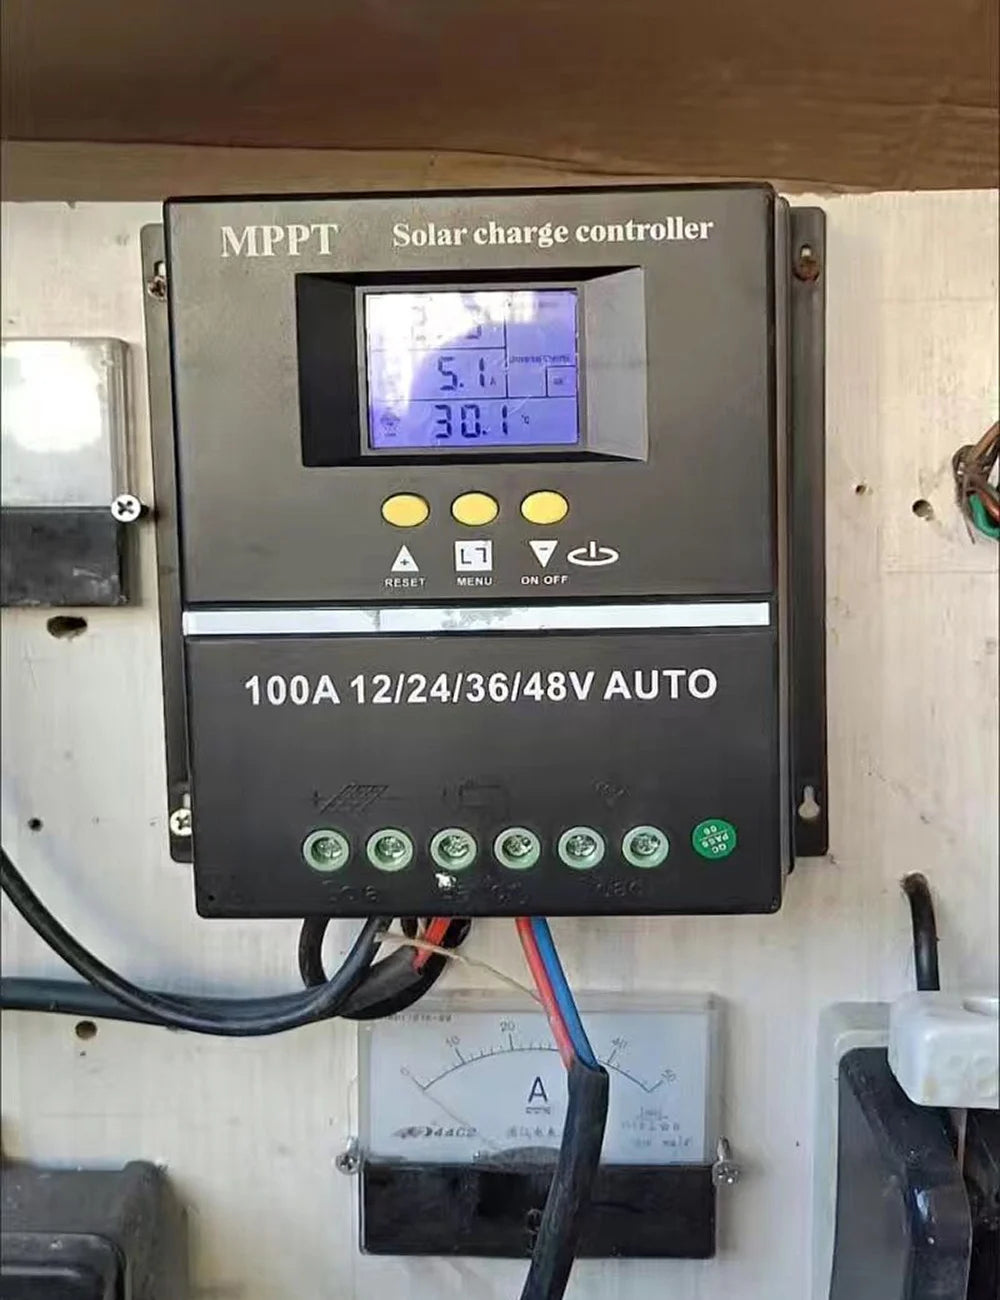 100A/80A/60A MPPT/PWM Solar Charge Controller, Multi-charge MPPT solar controller with LCD display and dual USB ports for charging 12V to 48V systems.